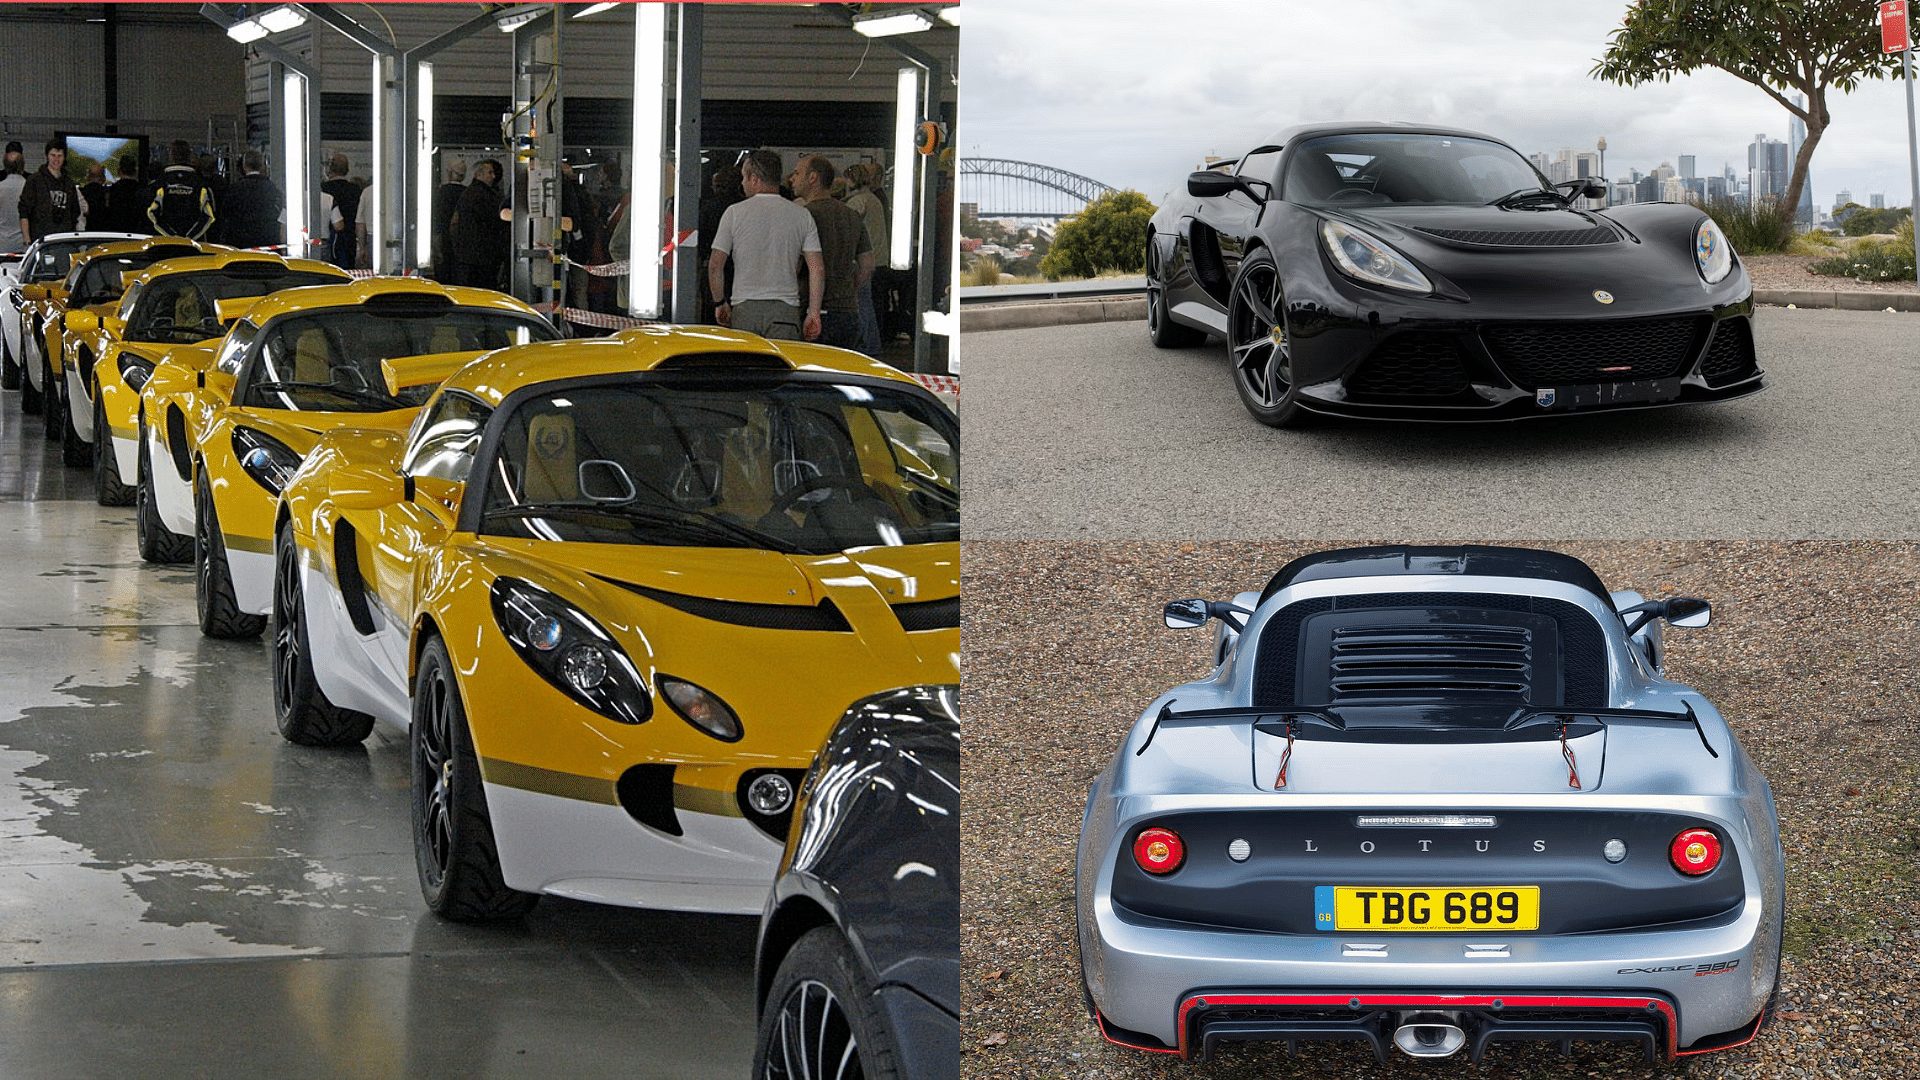 Lotus Exige - front and rear view